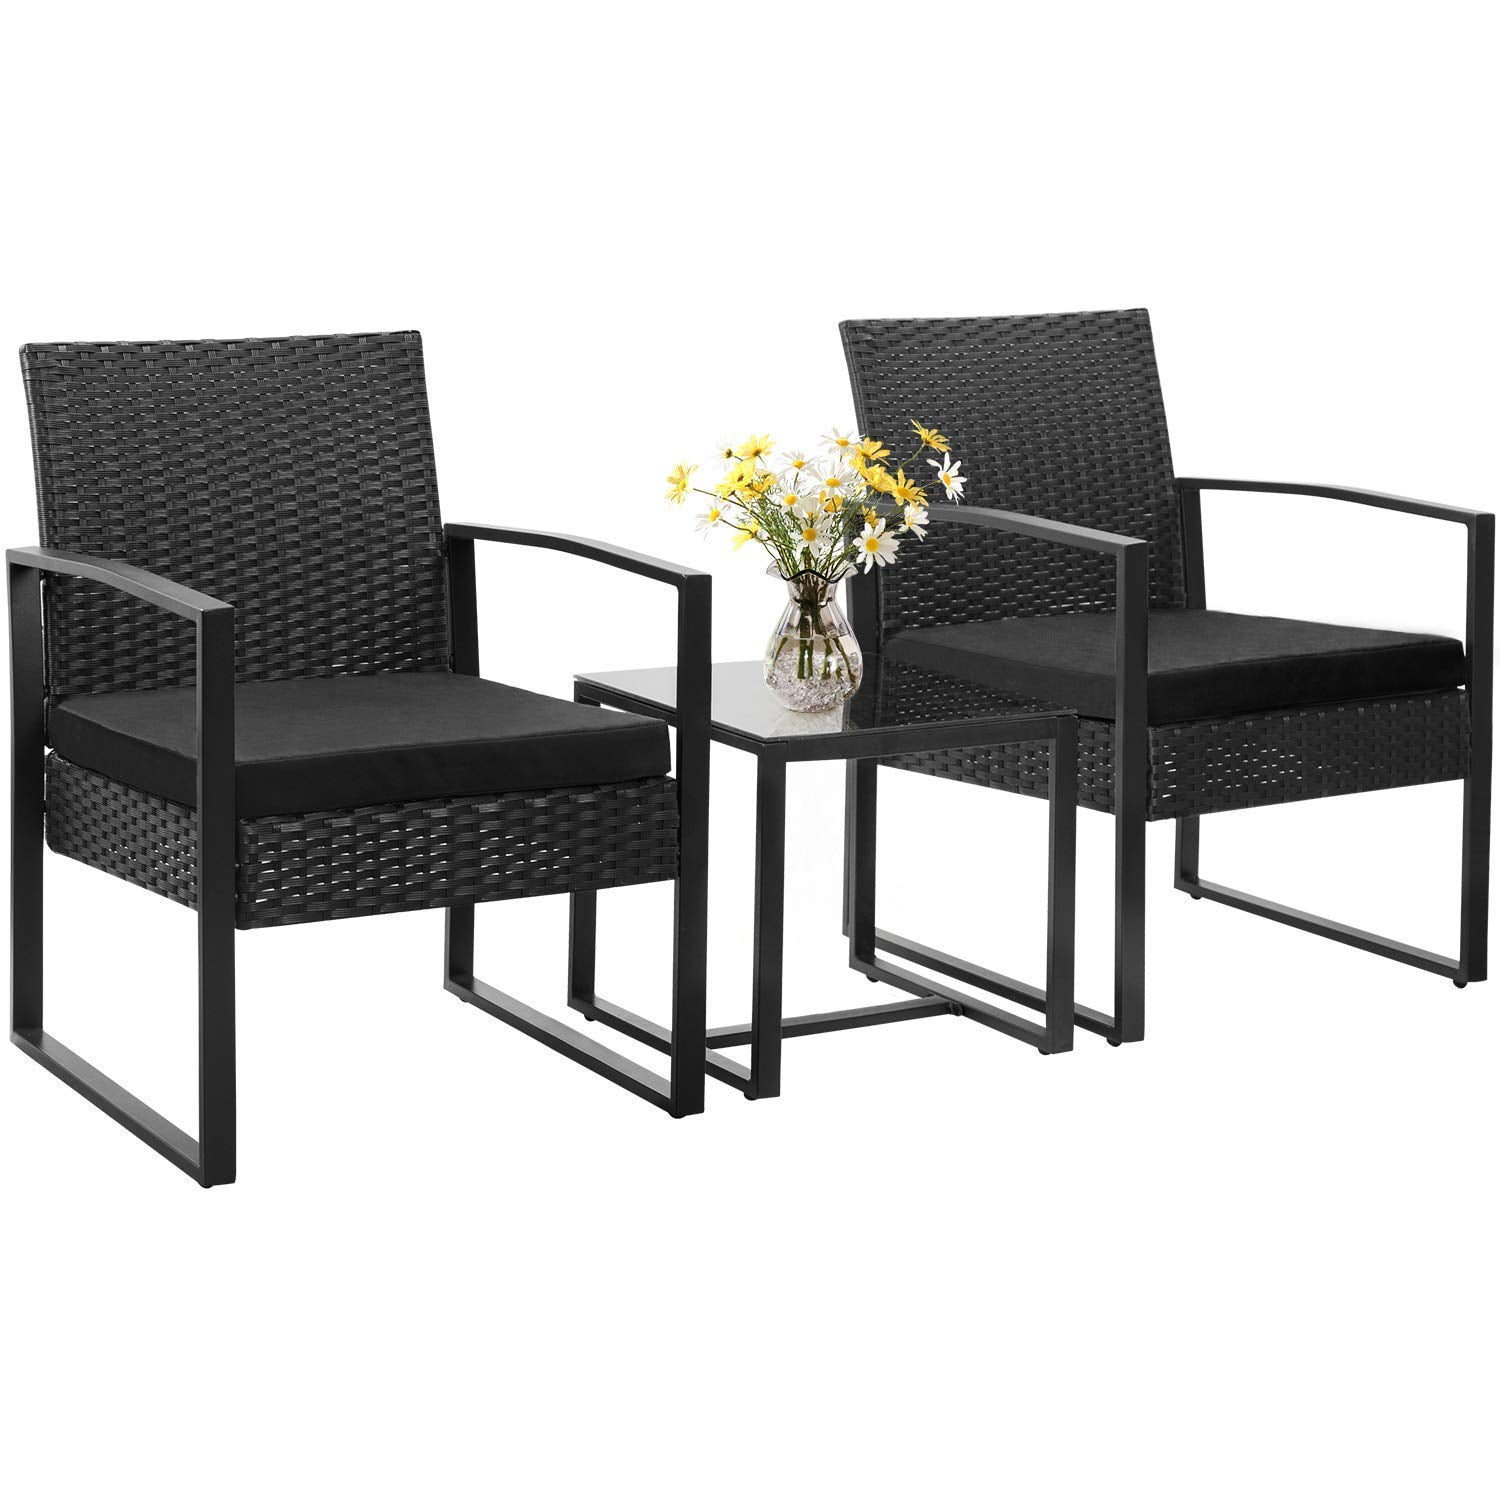 Walnew 3 Pieces Patio Furniture Cushioned Pe Rattan Bistro Chairs Set Of 2 With Coffee Table Black Com - 3pc Rattan Garden Patio Furniture Set With Cover